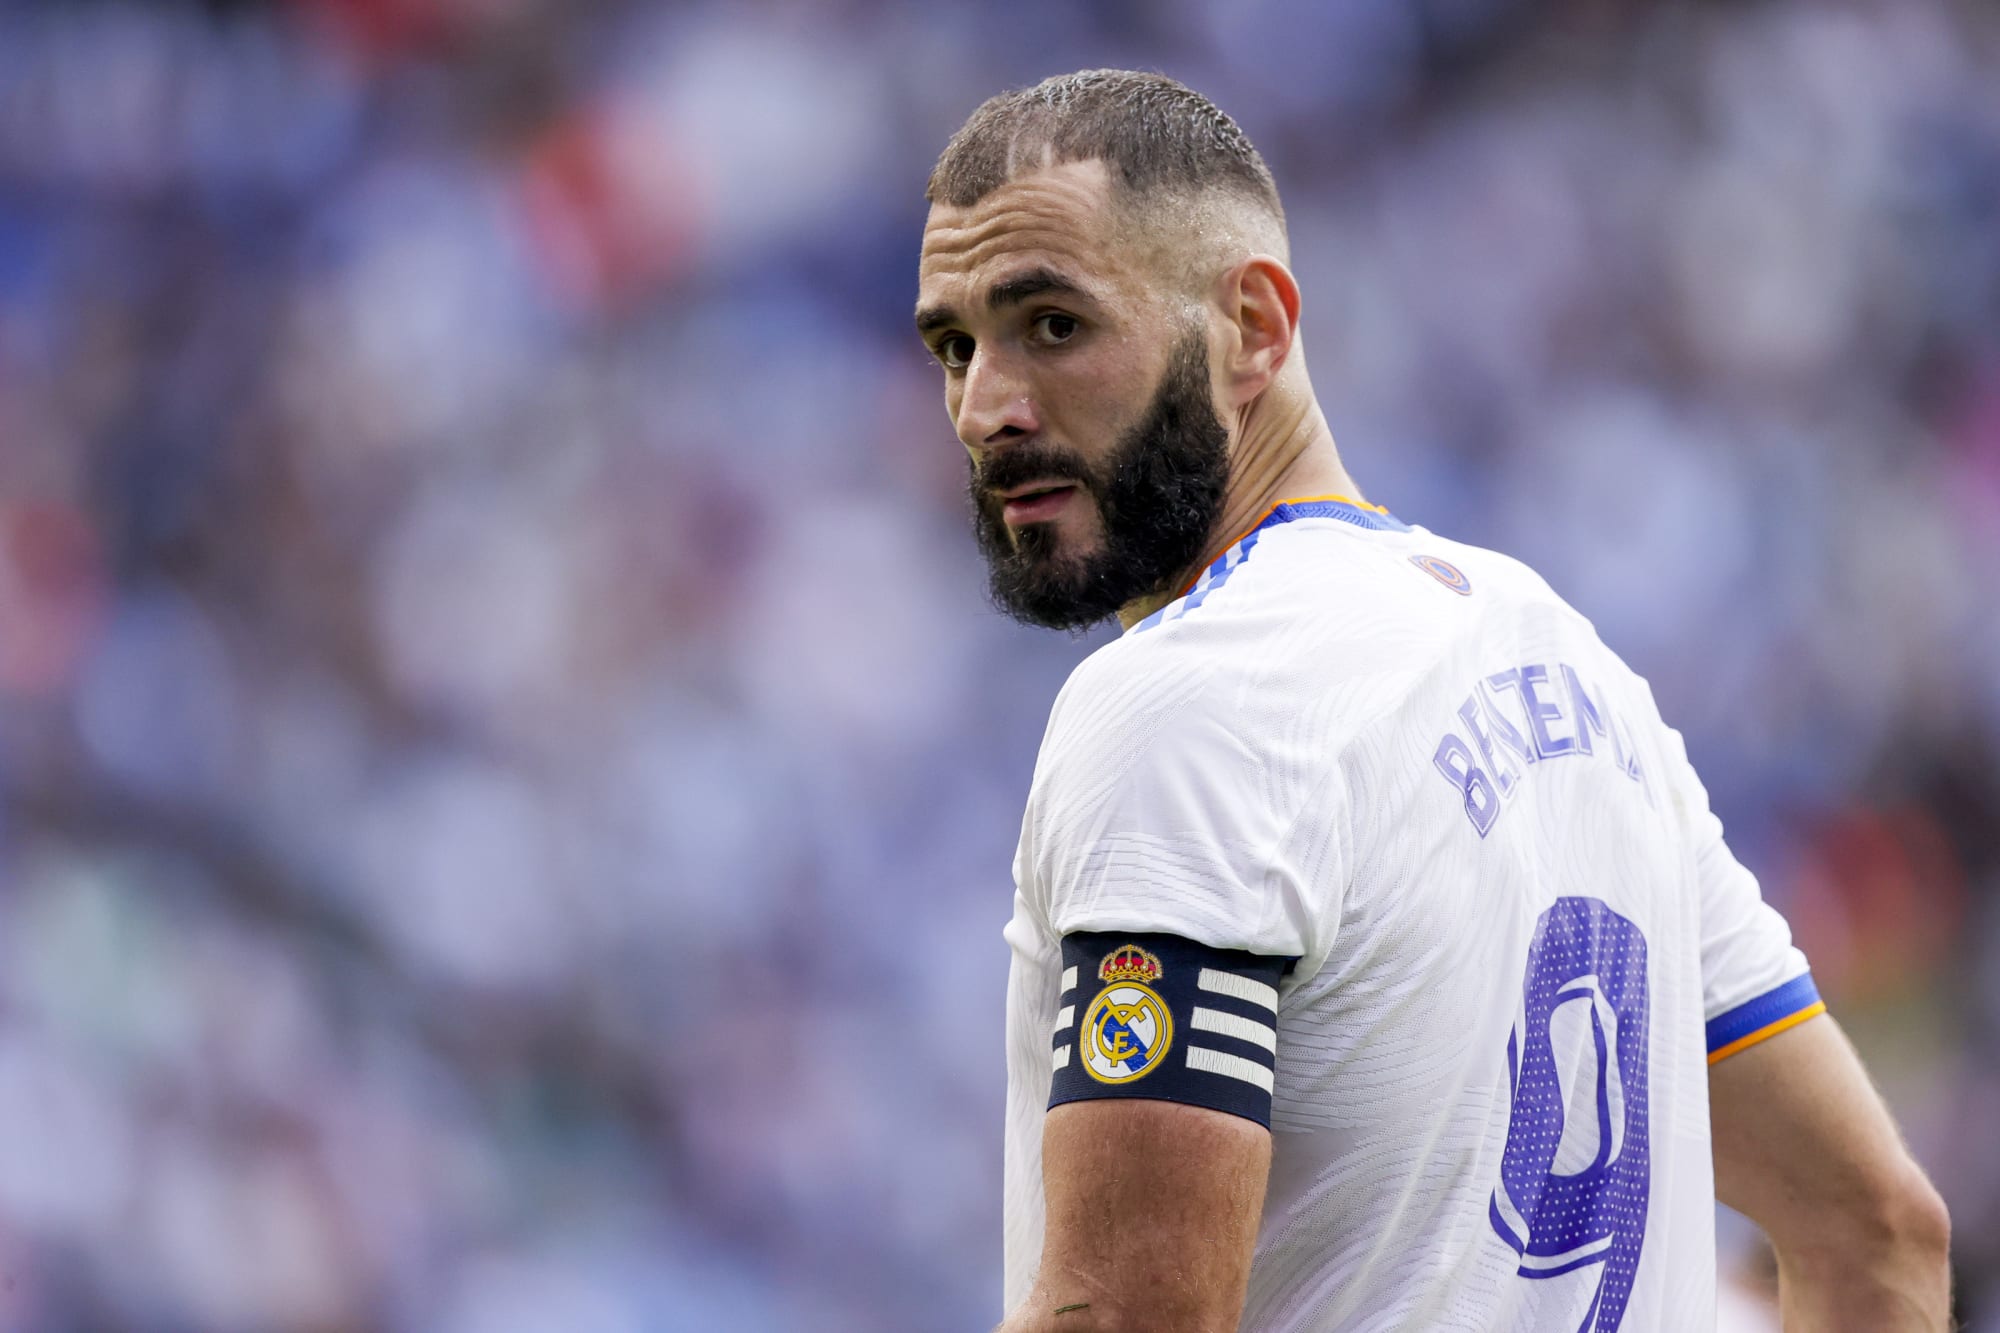 5 Real Madrid players who must step up with Karim Benzema injured - Flipboa...